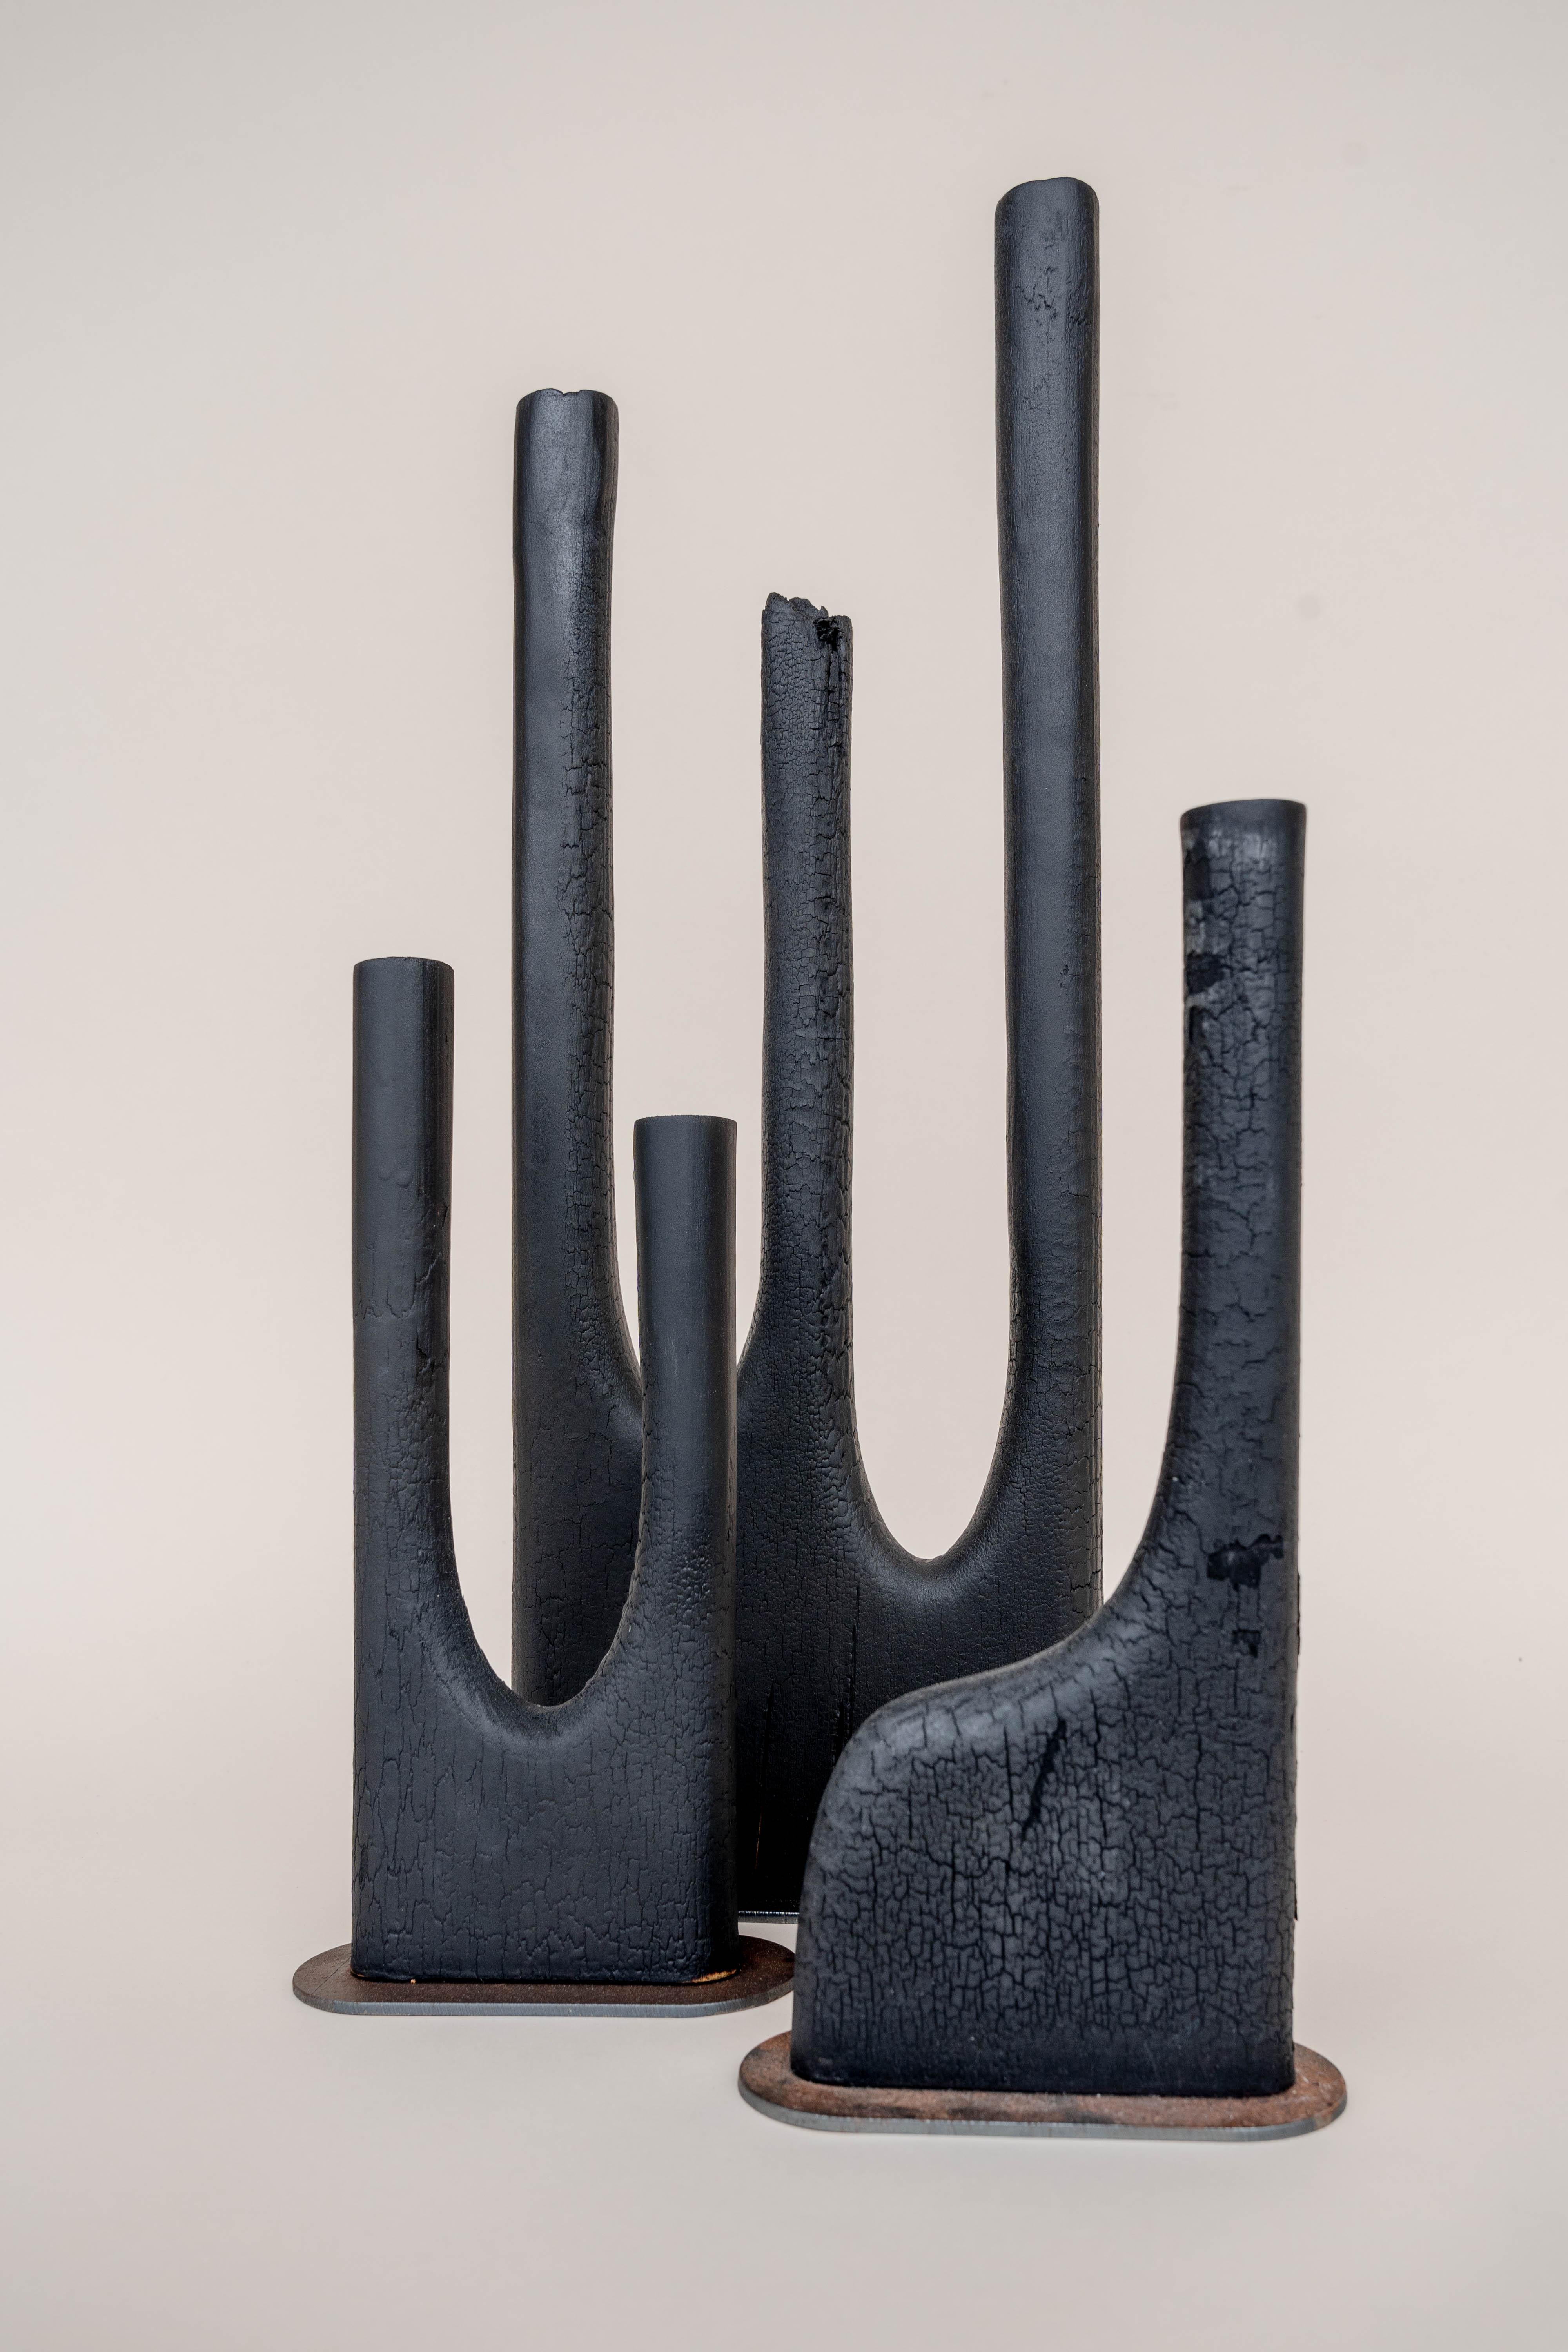 Set of Trio Vase, Dou vase and Uno vase by Daniel Elkayam
Dimensions: D 2.5 x W 16 x H 46 cm (Trio), D 2.5 x W 10 x H 39 cm (Dou), D 2.5 x W 10 x H 27 cm (Uno)
Materials: Burnt beech wood


Jerusalem-born Art-designer and Photographer based in